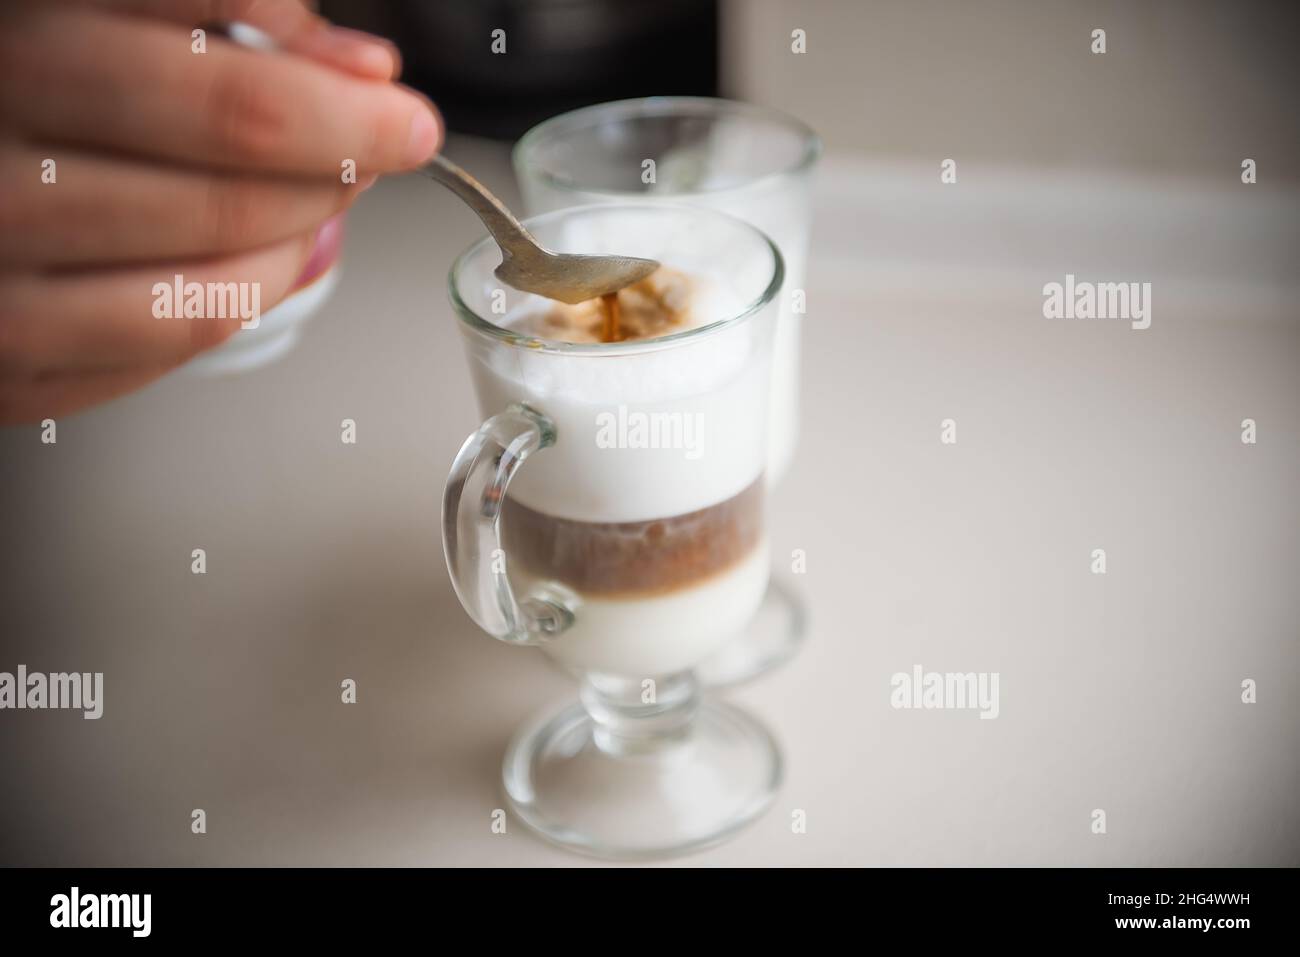 The hands of a young man make coffee from a coffee machine. Morning latte for breakfast at home. Homemade barista cappuccino in a stylish kitchen. Clo Stock Photo